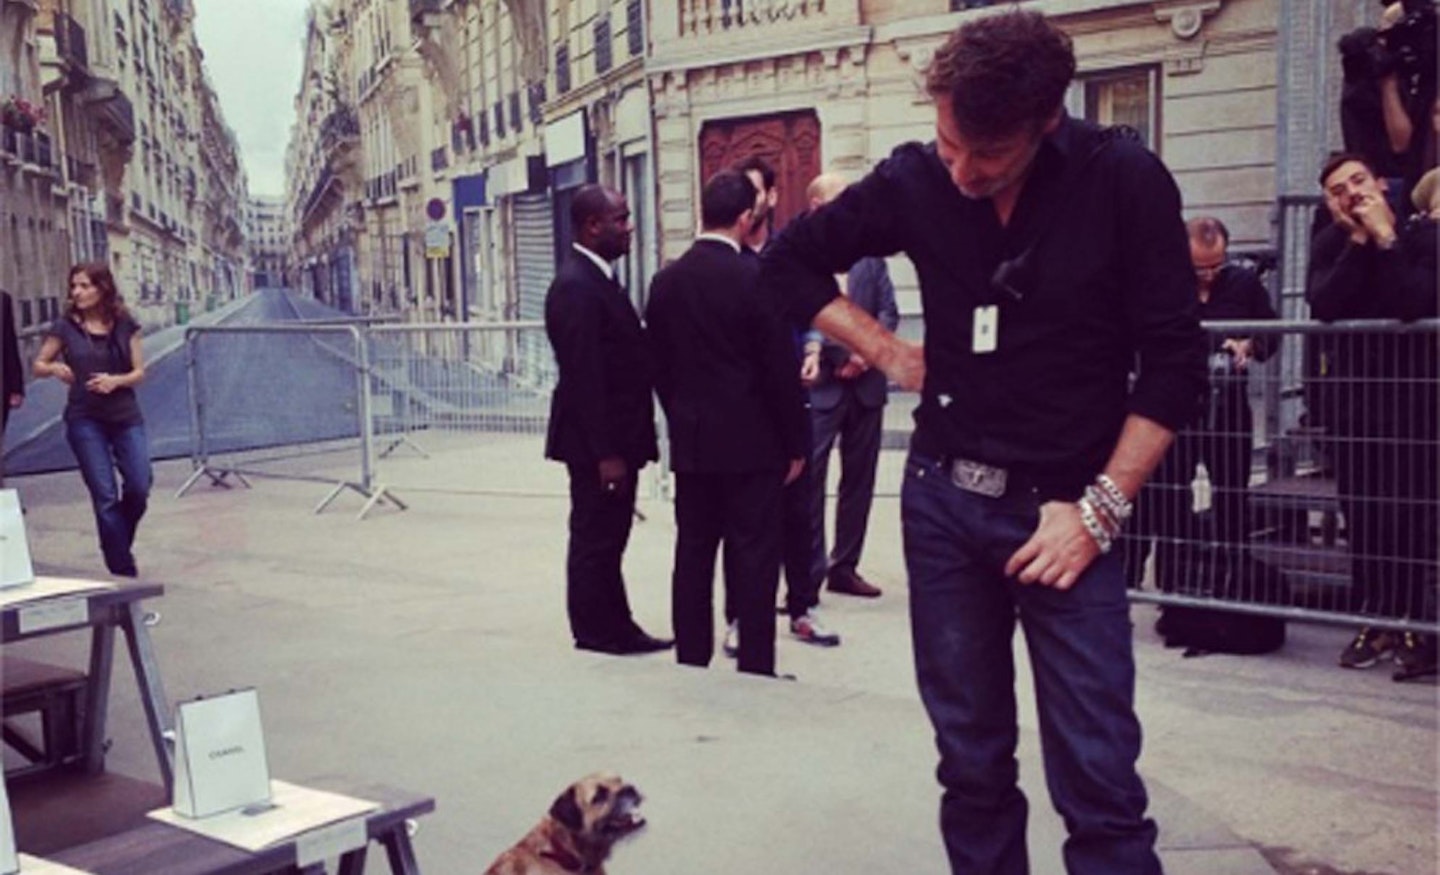 @Grazia_Live: Aww! There's even a dog to add to the scene. Now where's Choupette?